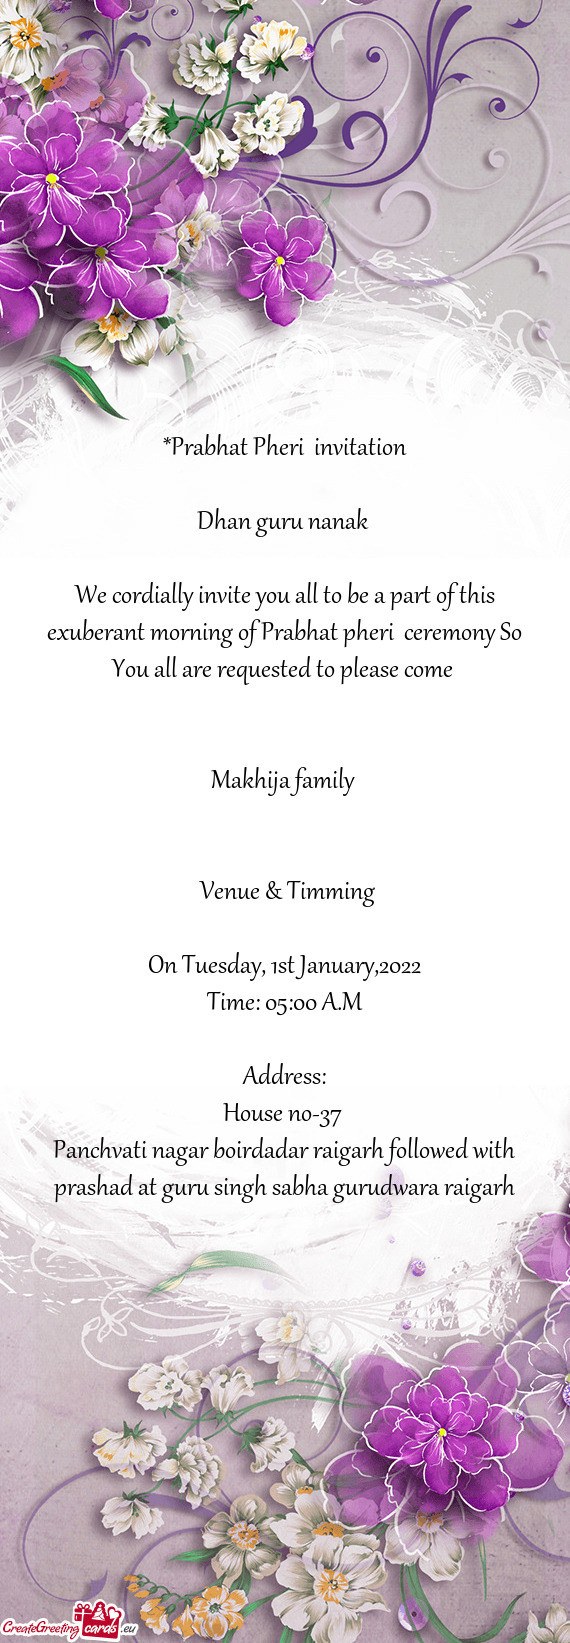 We cordially invite you all to be a part of this exuberant morning of Prabhat pheri ceremony So You